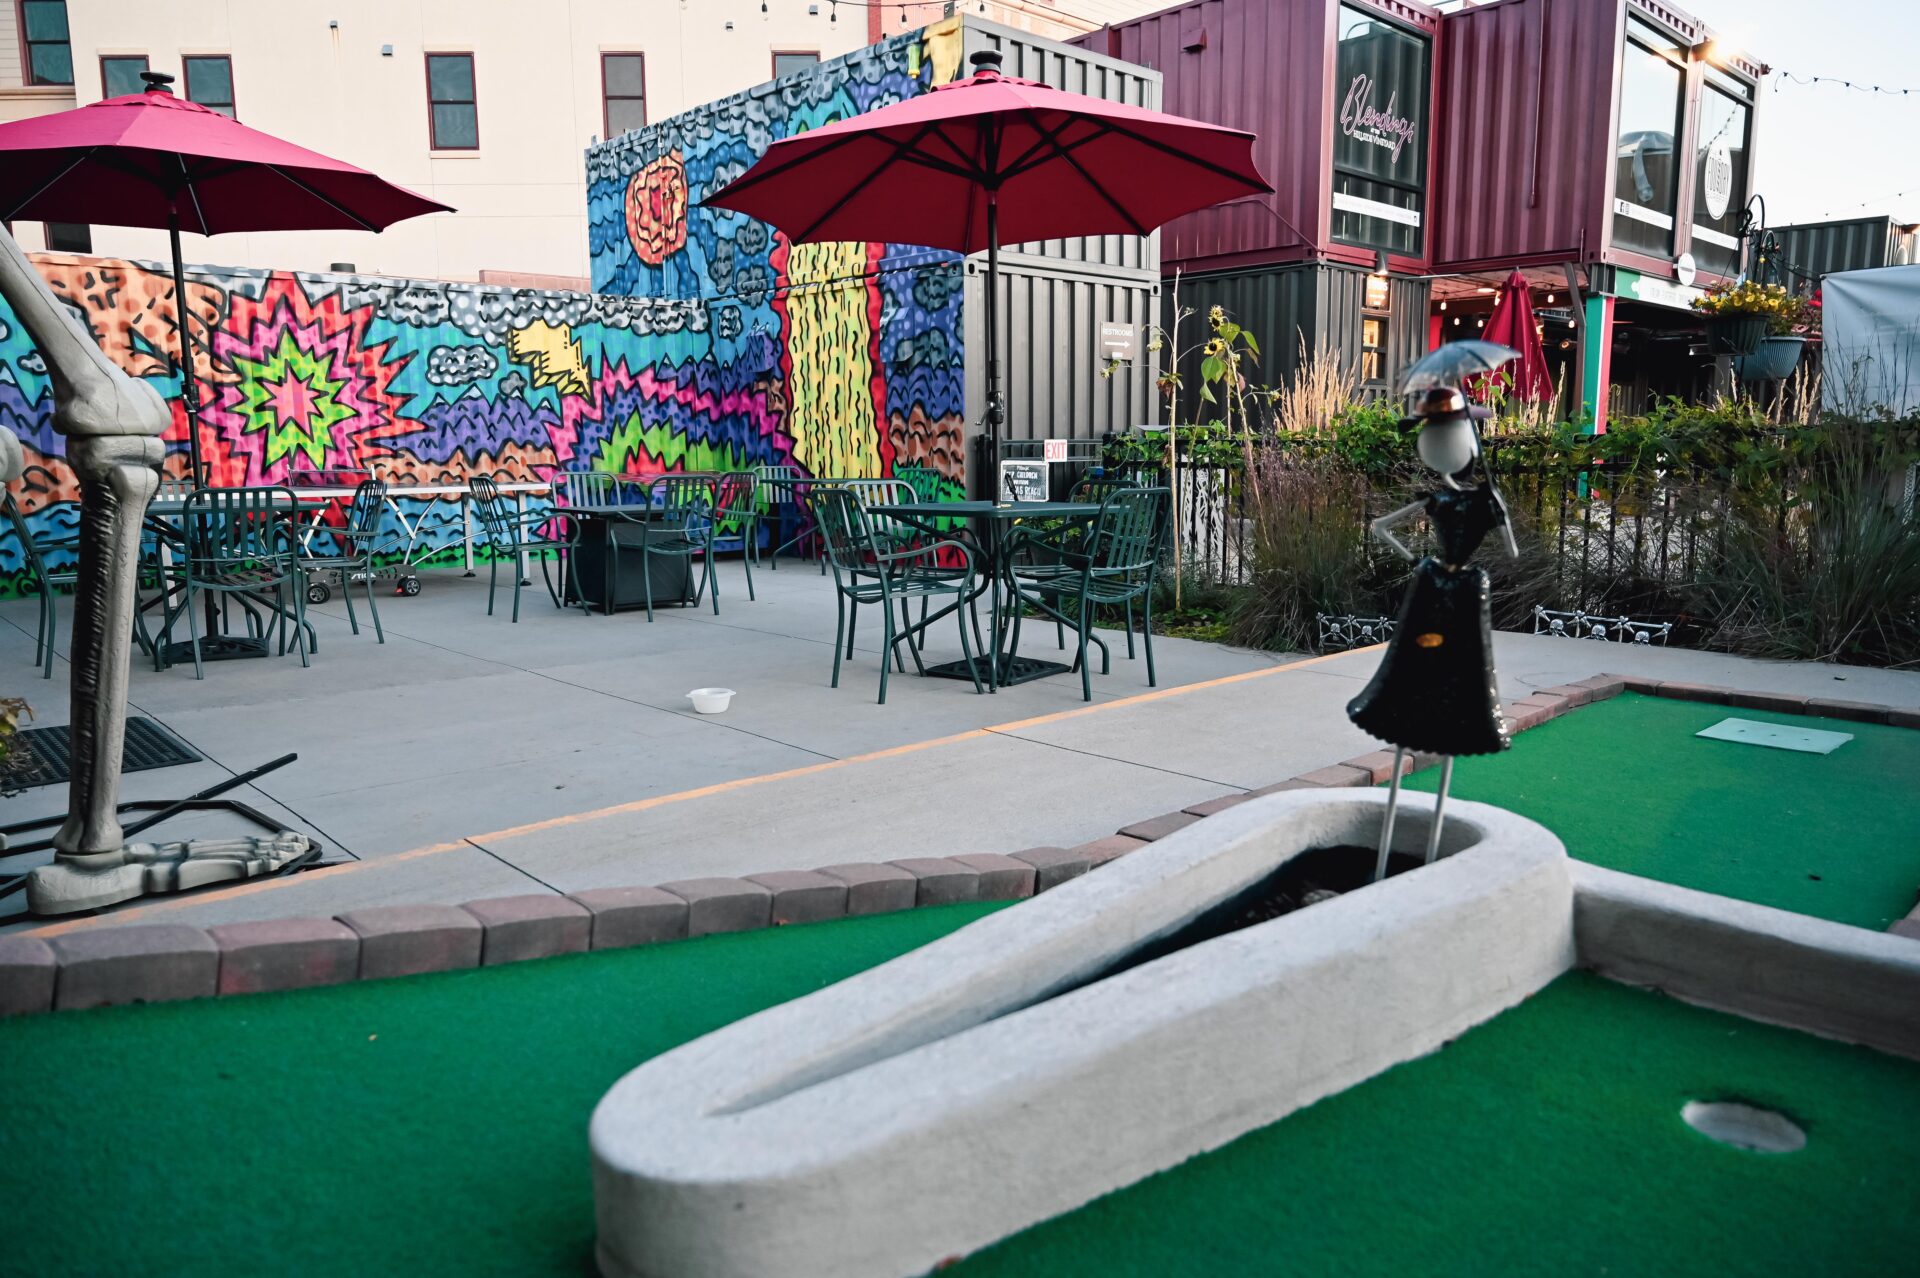 outside putting green at old town putt, one of the fun things to do in Fort Collins